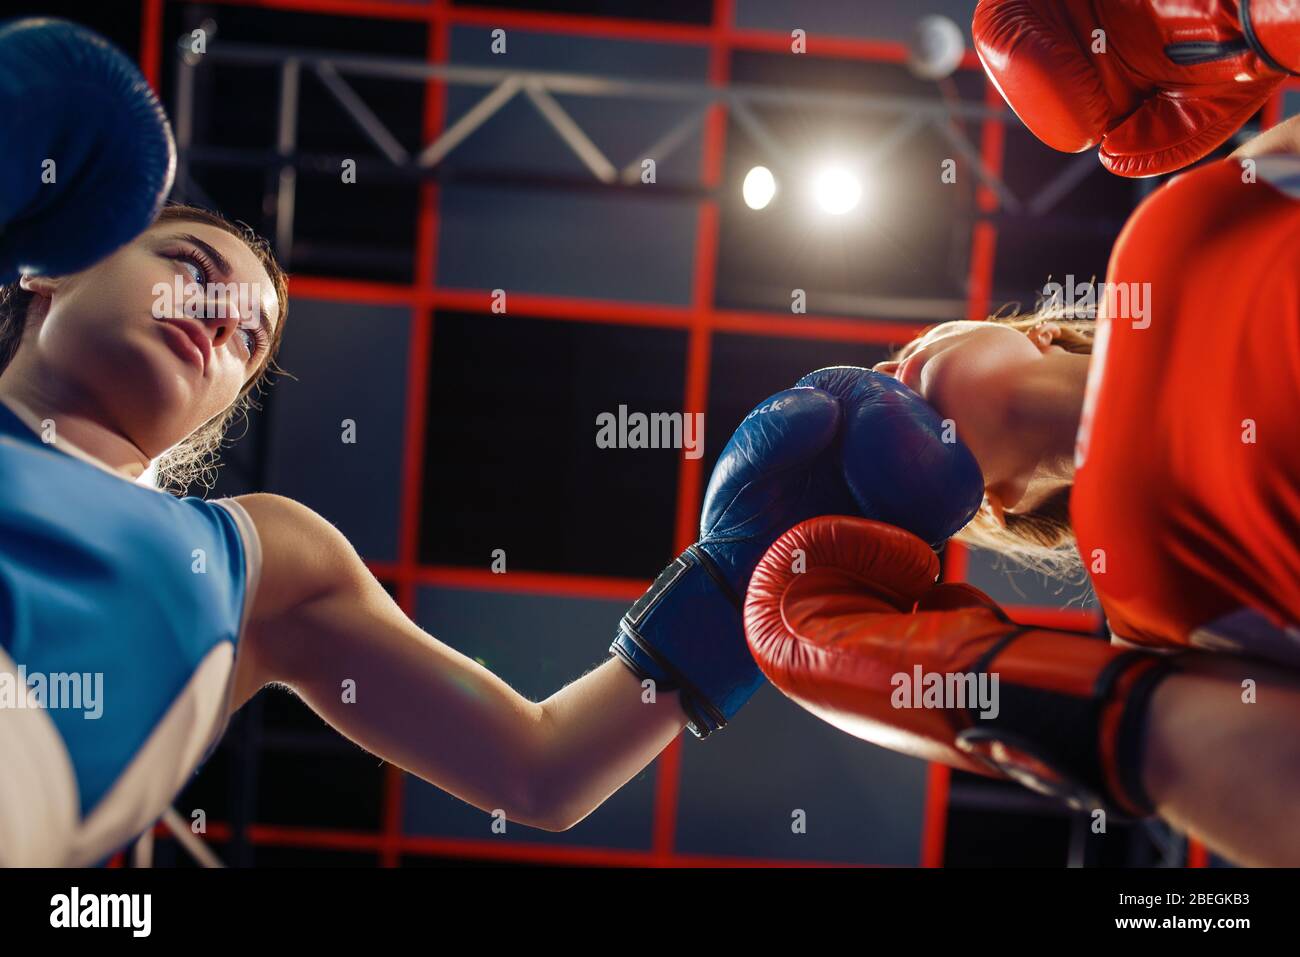 Women in gloves boxing on the ring, bottom view Stock Photo